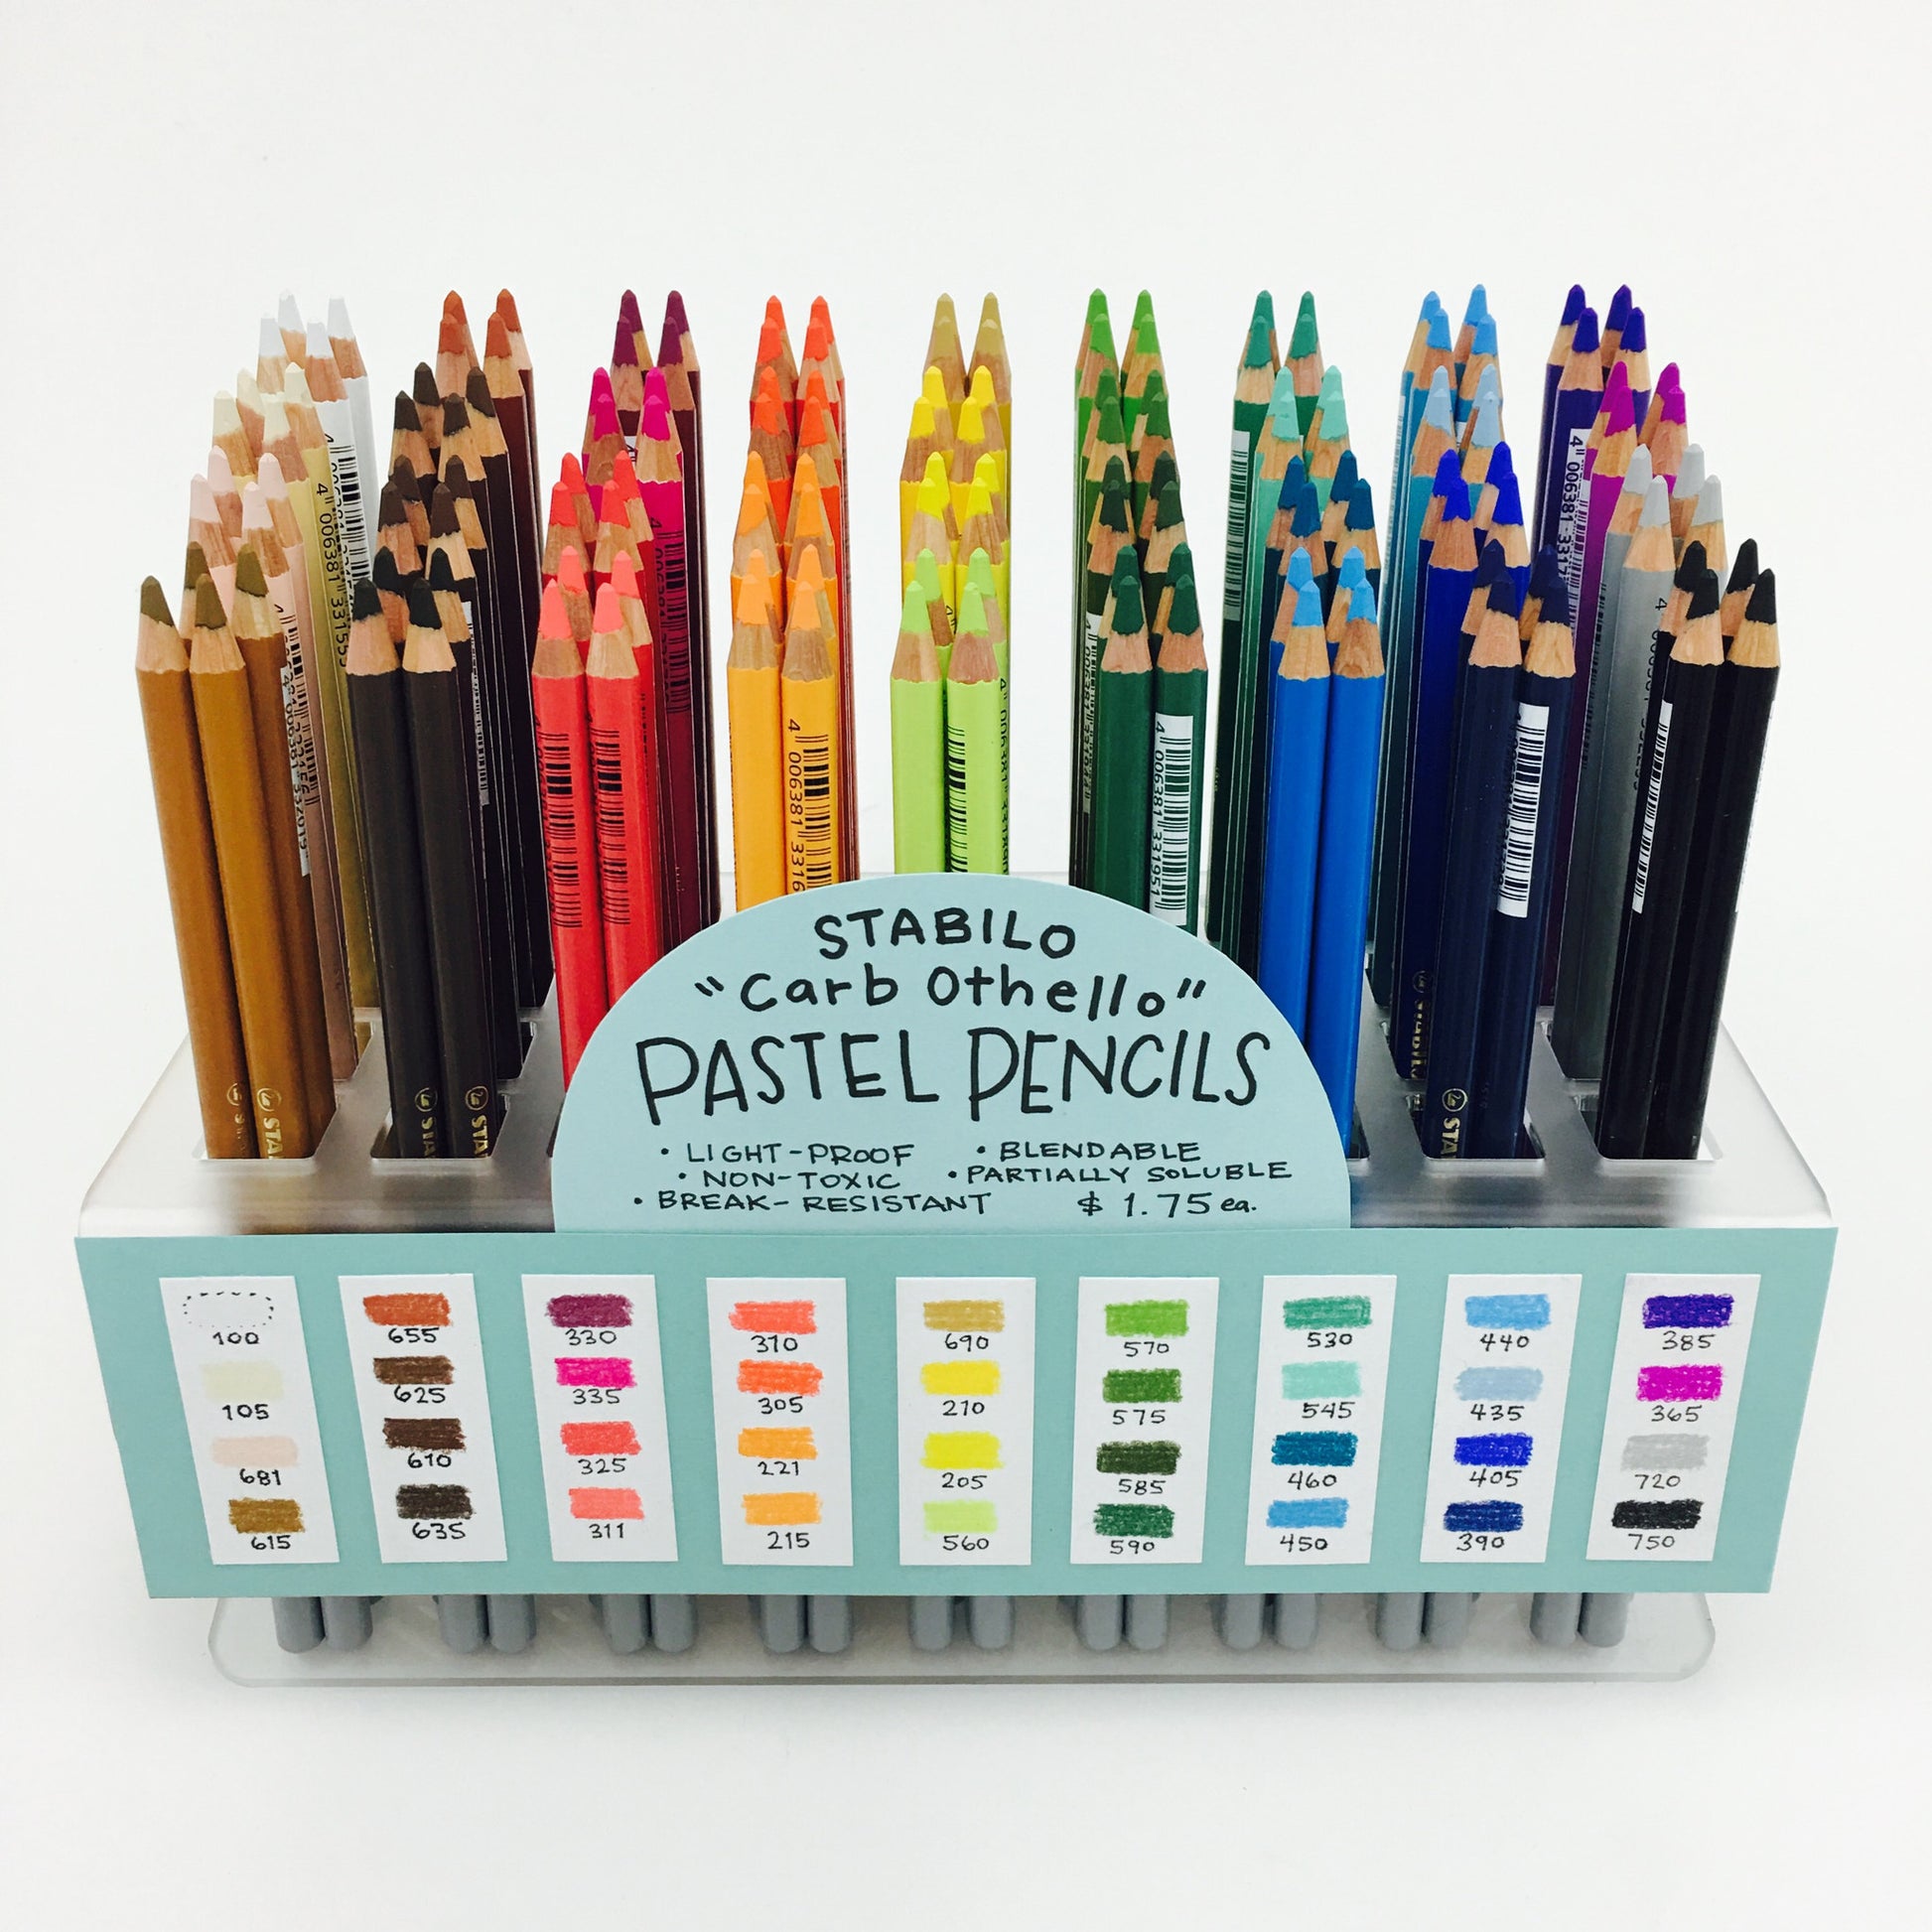 Chalk-pastel pencil STABILO CarbOthello - metal box with 24 colors